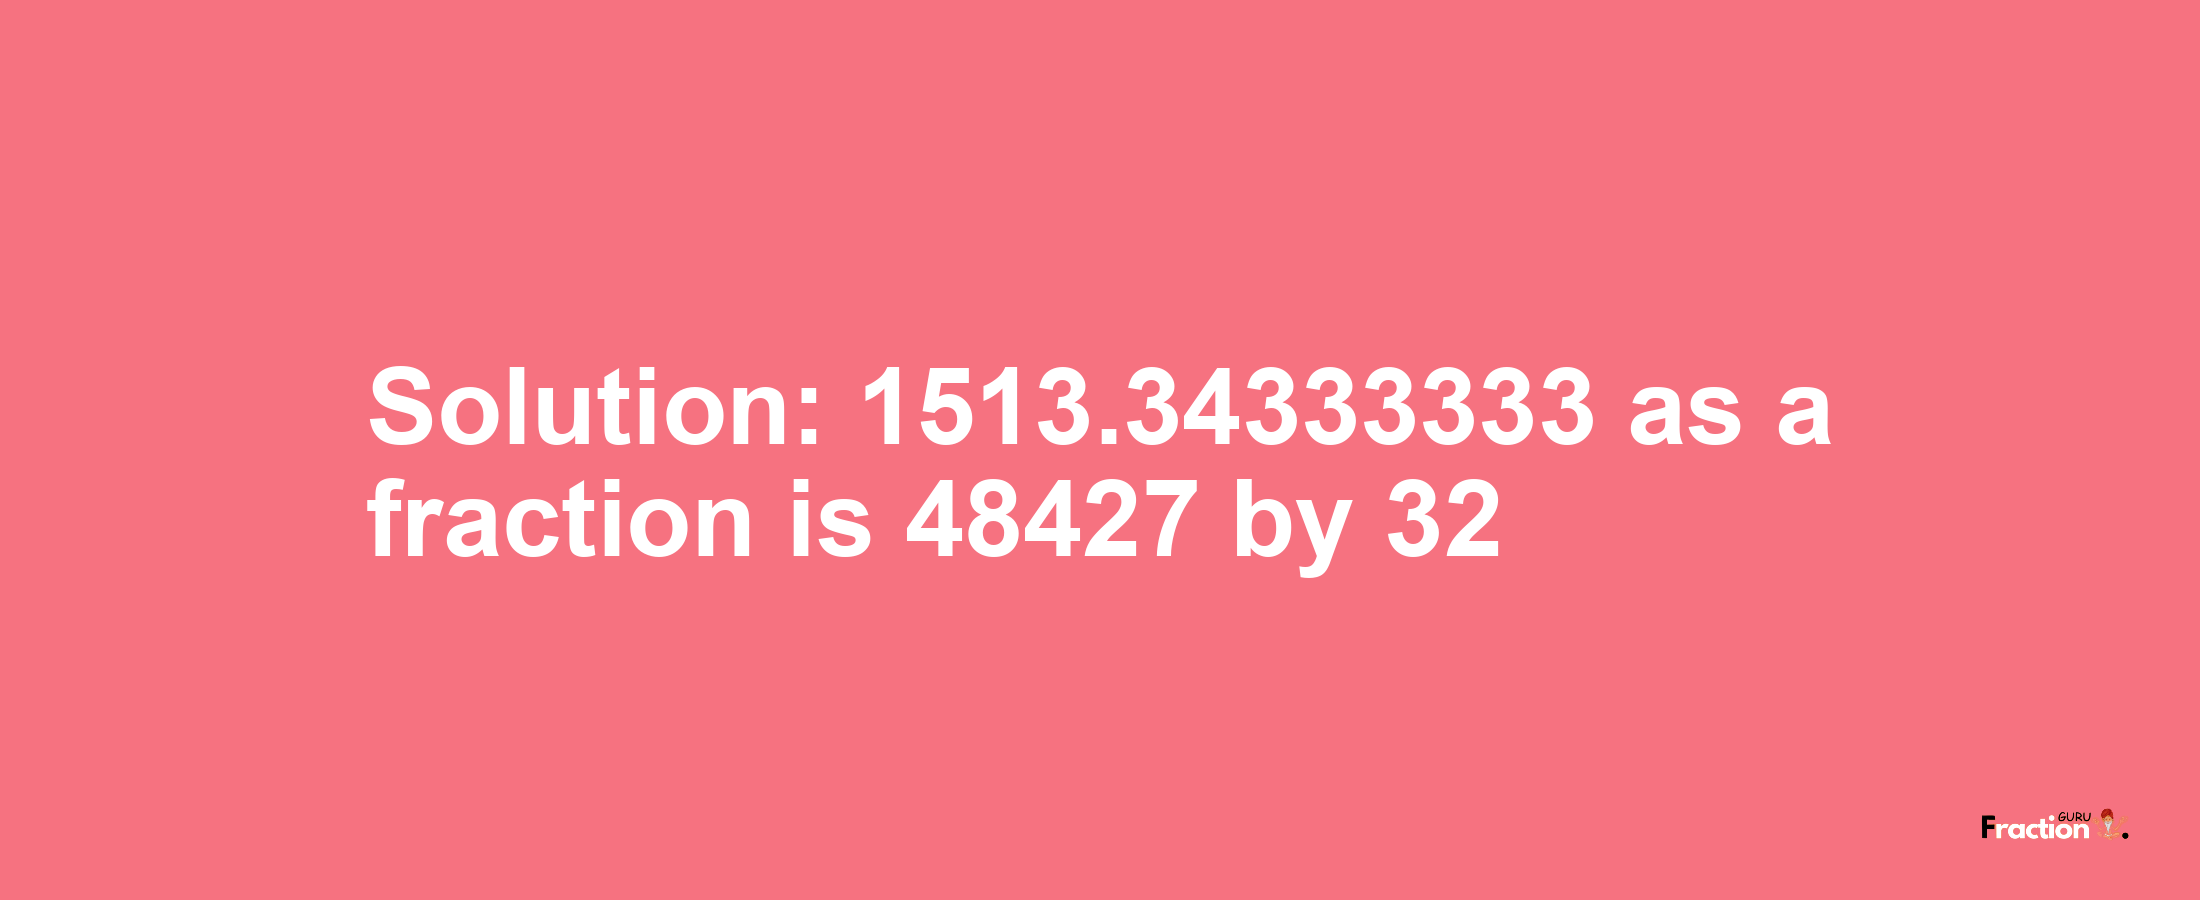 Solution:1513.34333333 as a fraction is 48427/32